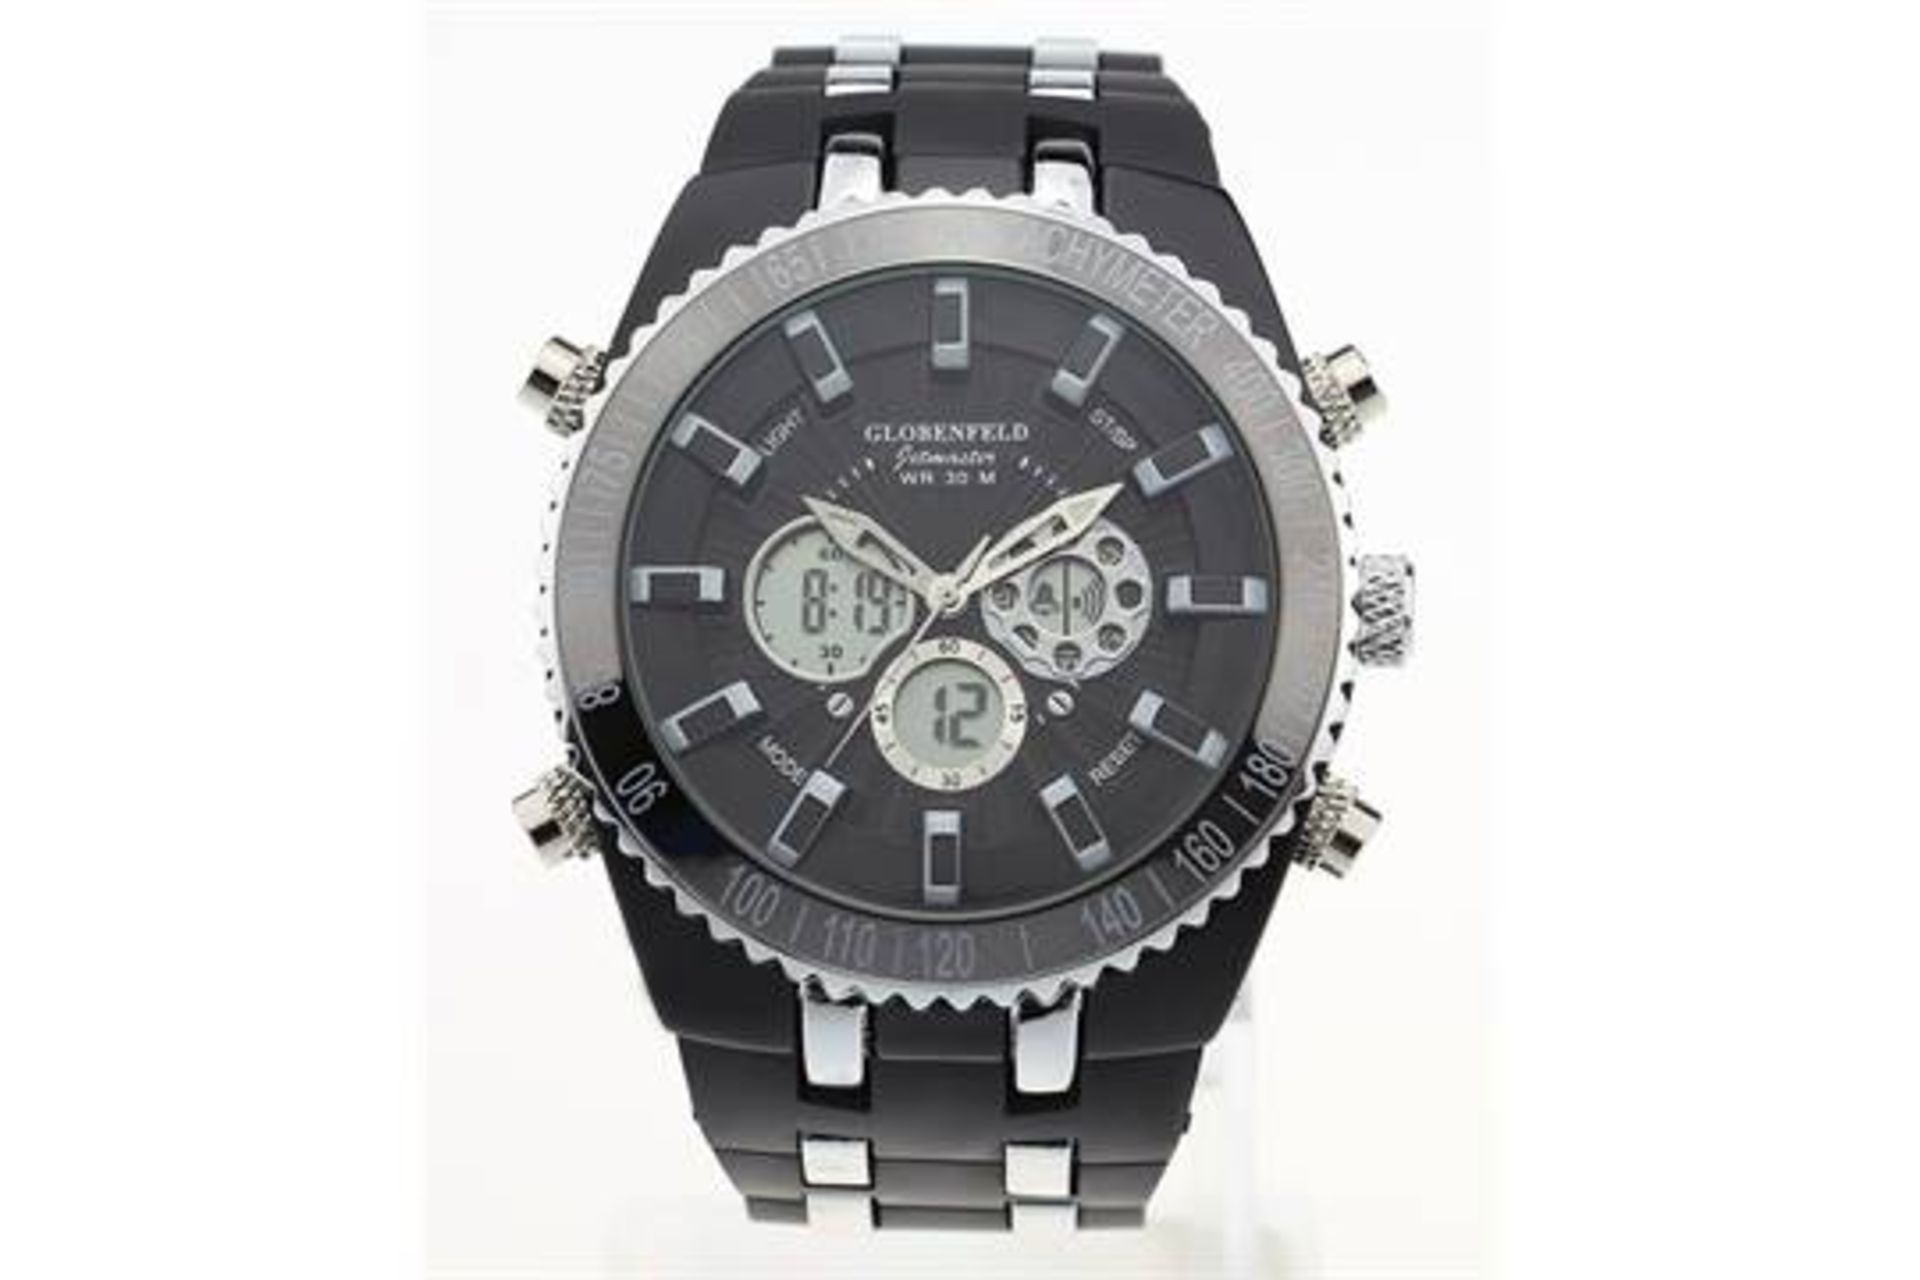 V Brand New Gents Globenfeld Jetmaster - Black Face SRP Up to £425 With Box & Warranty X 2 YOUR